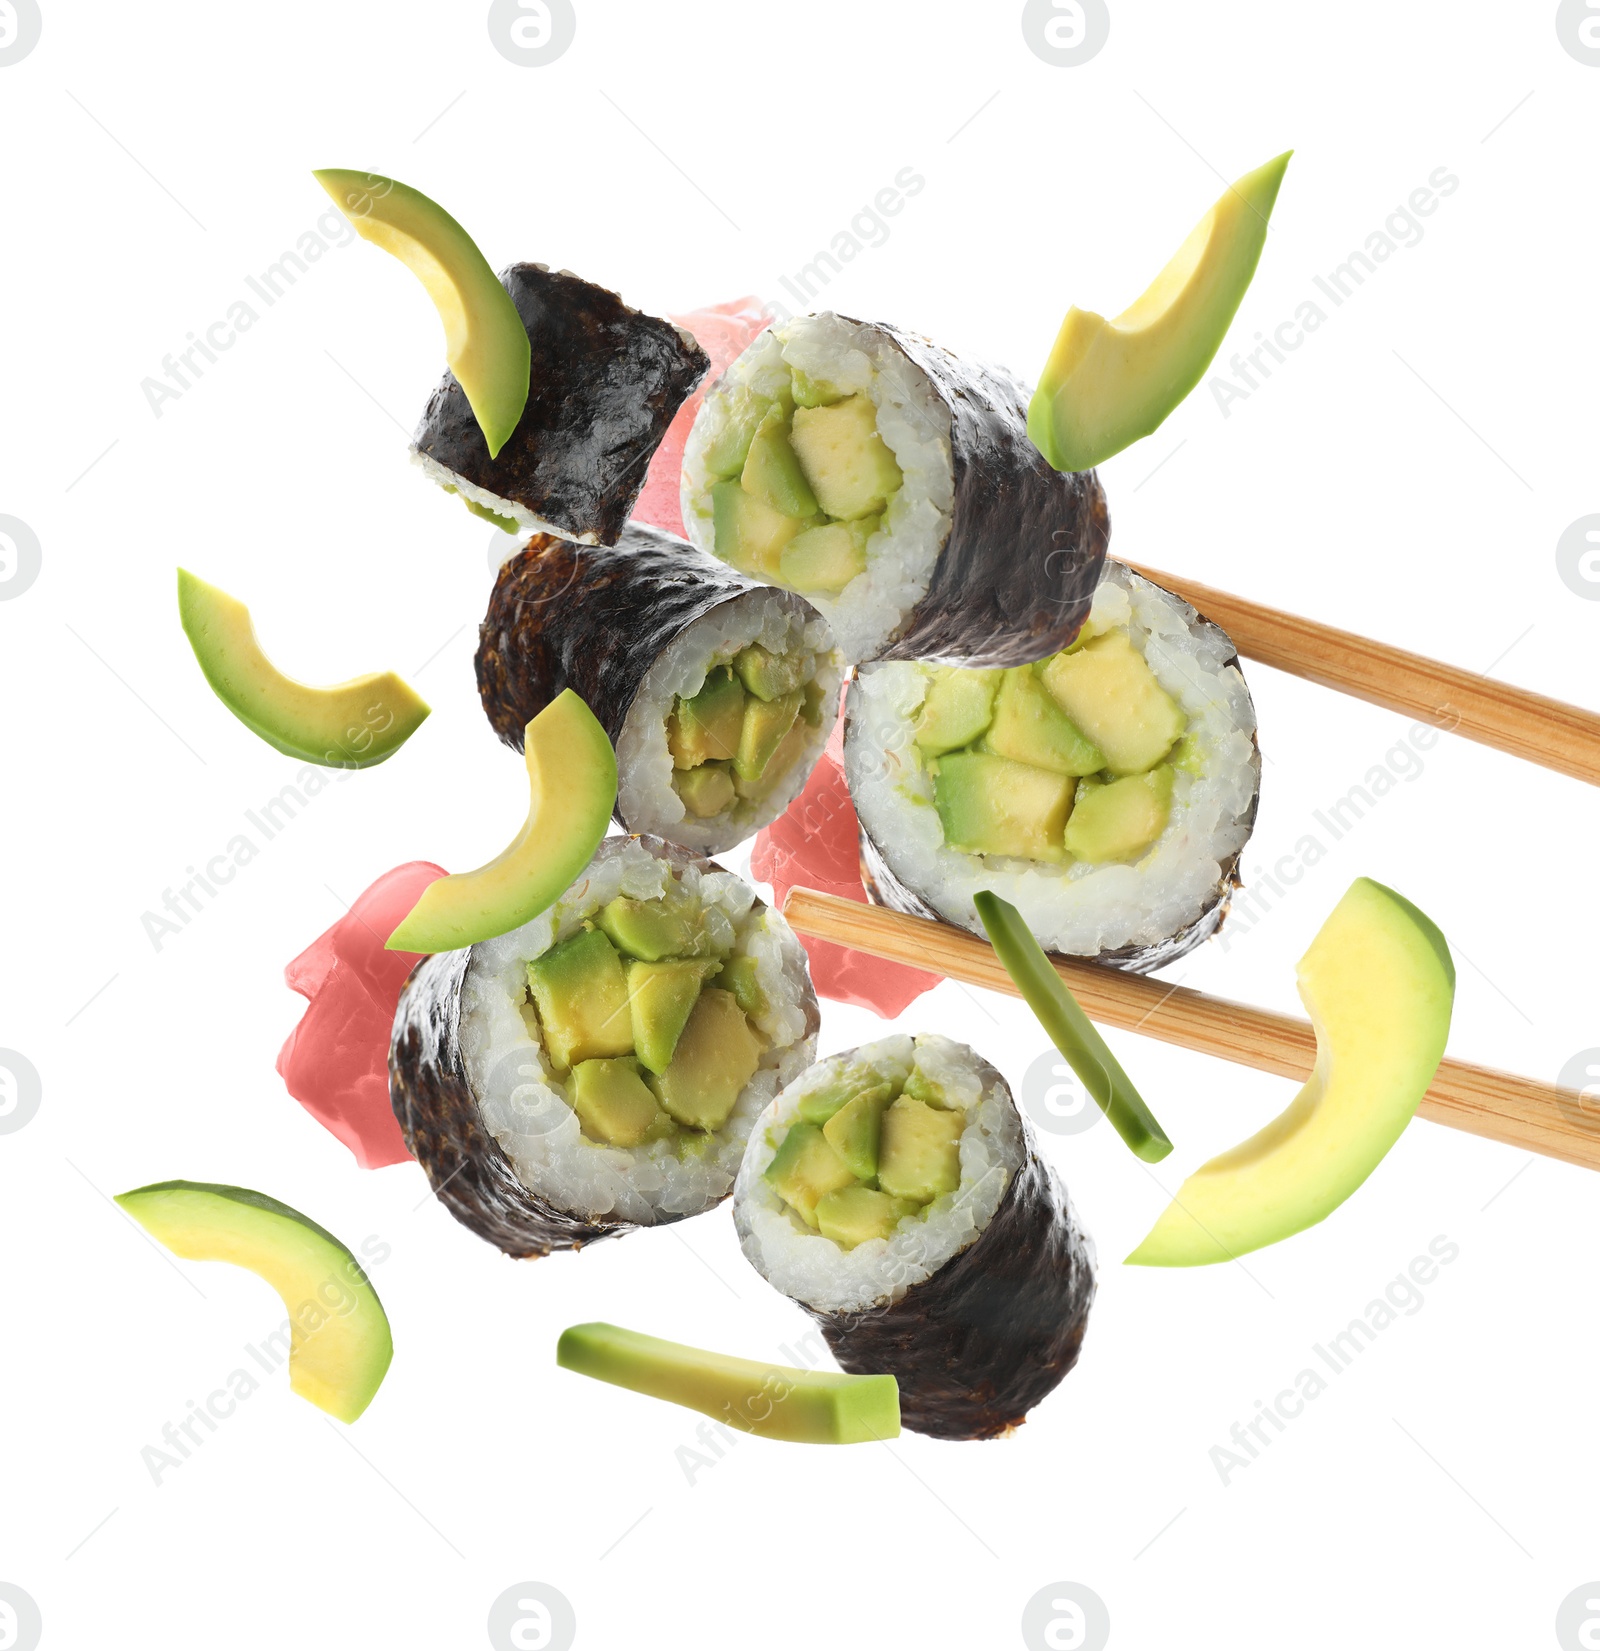 Image of Sushi rolls with avocado and ingredients on white background